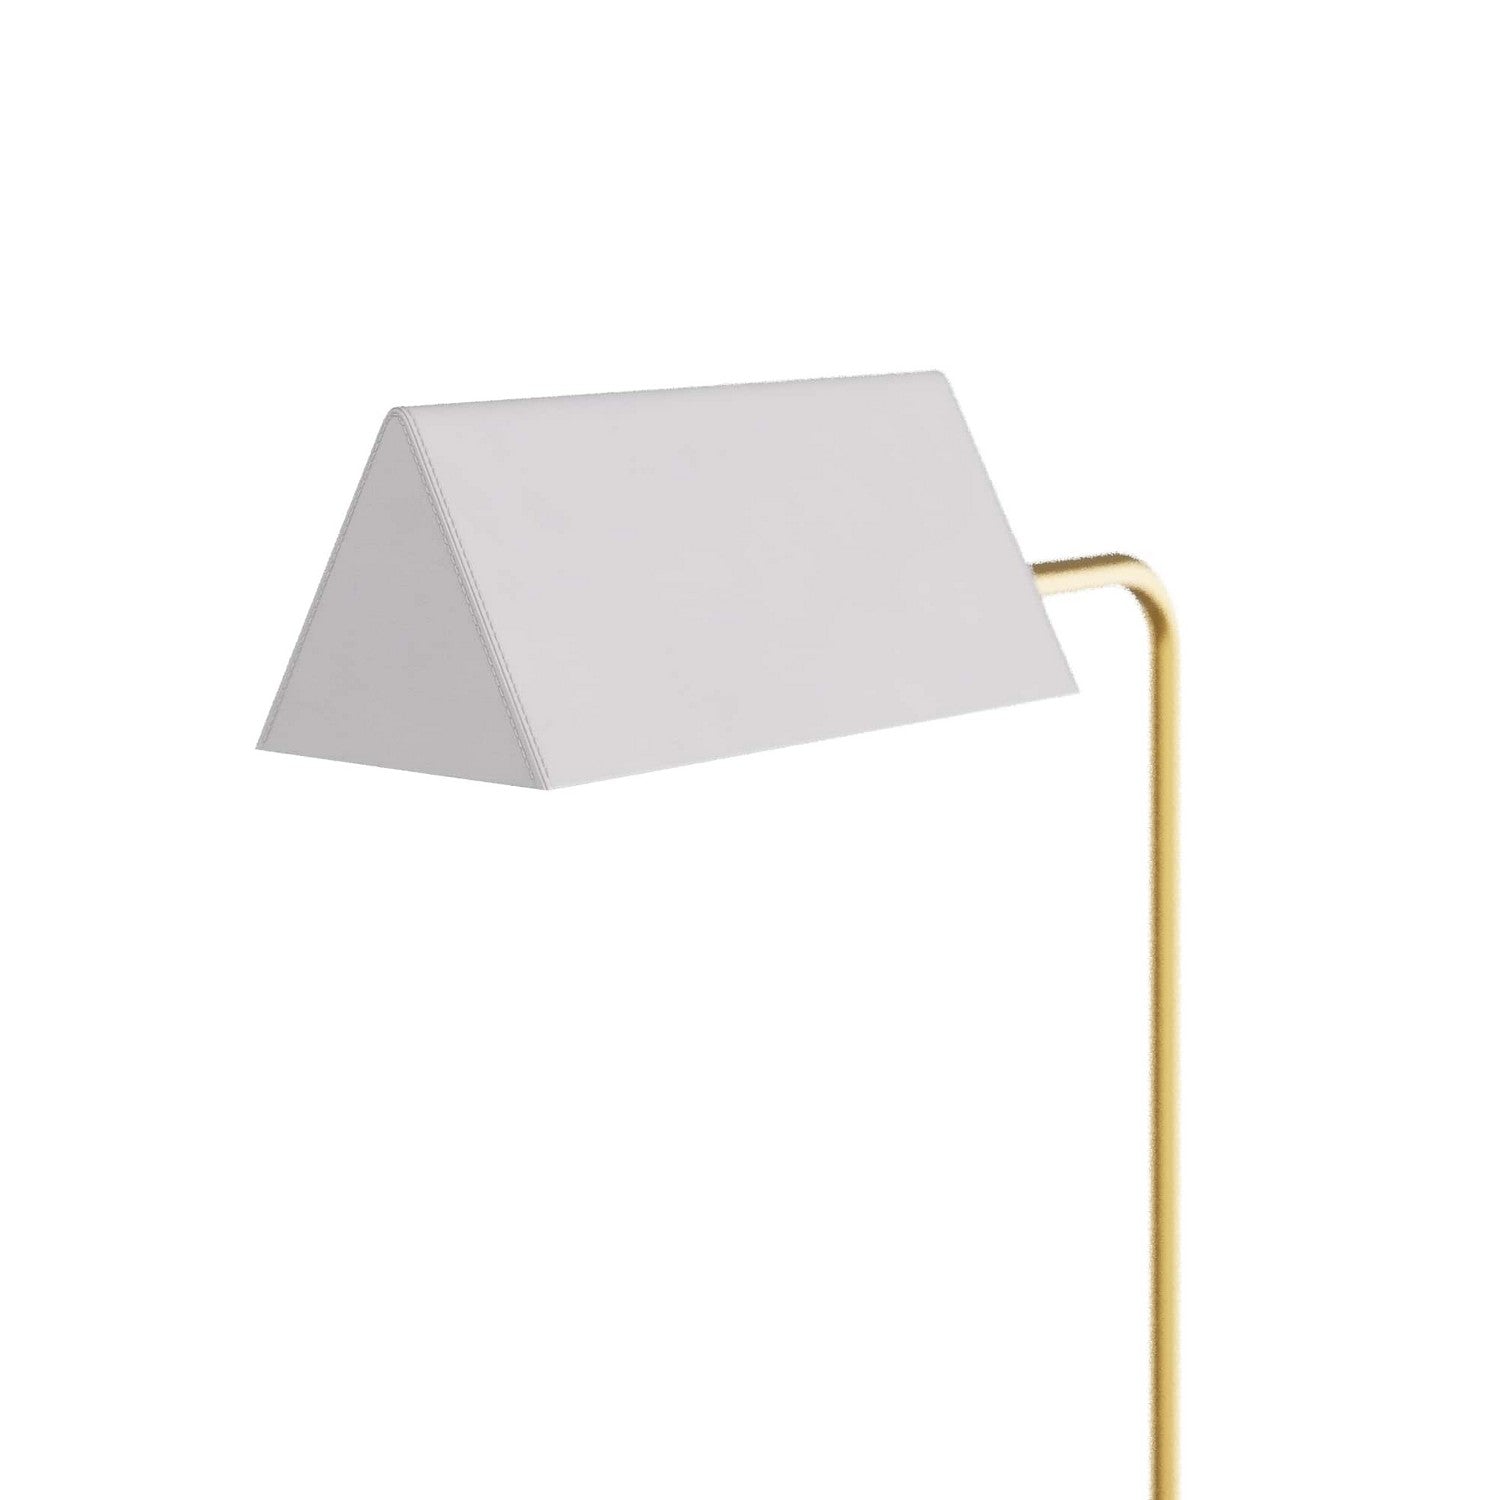 LED Floor Lamp from the Tyson collection in Antique Brass finish